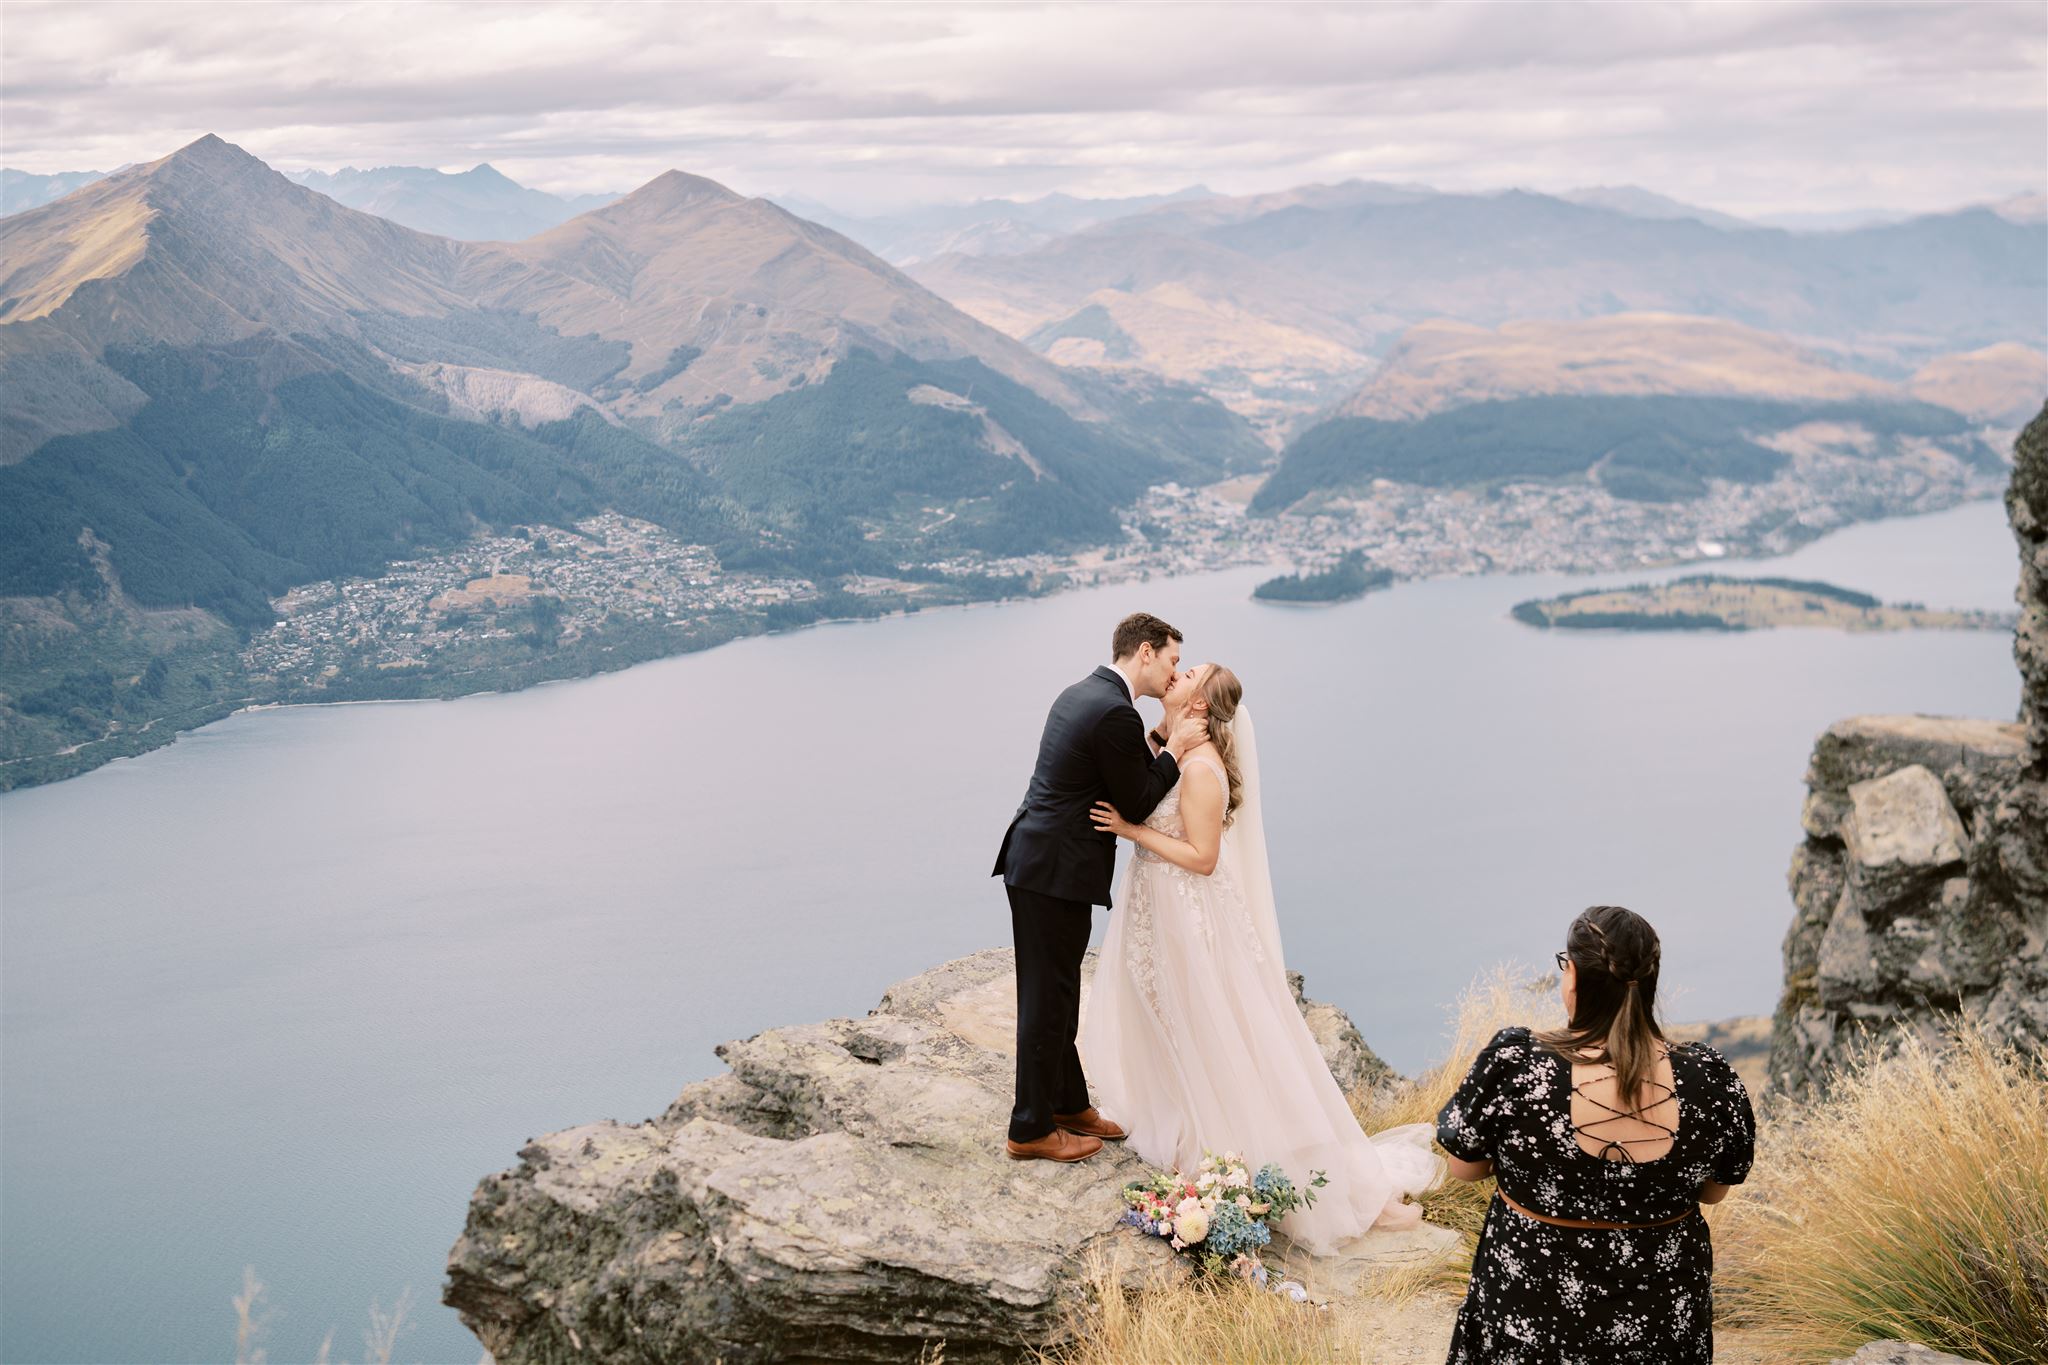 Queenstown New Zealand Heli Wedding Elopement Photographer クイーンズタウン　ニュージーランド　エロープメント 結婚式 | A couple sharing a kiss on a mountain overlook with a lake and hills in the background, while a wedding photographer captures the moment.